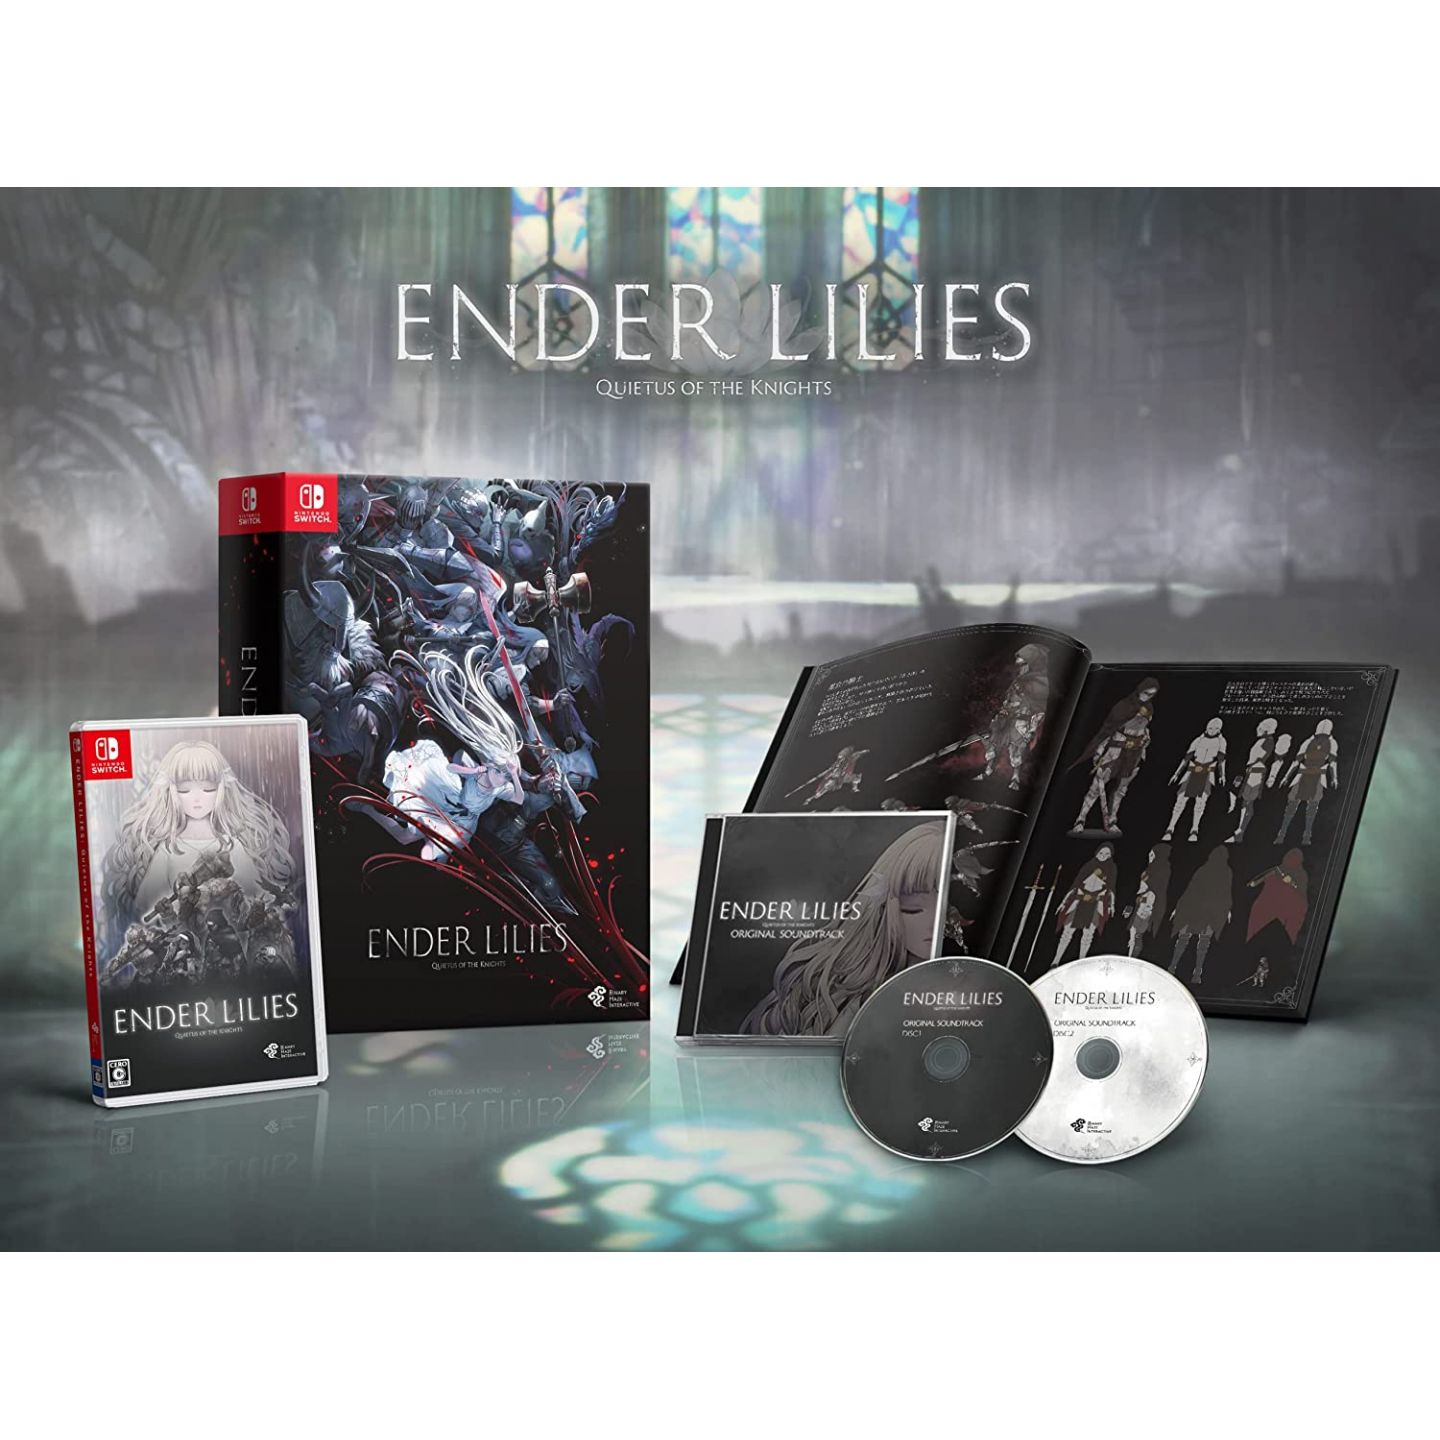 https://www.japanzon.com/136477-product_hd/binary-haze-interactive-ender-lilies-quietus-of-the-knights-limited-edition-for-nintendo-switch.jpg